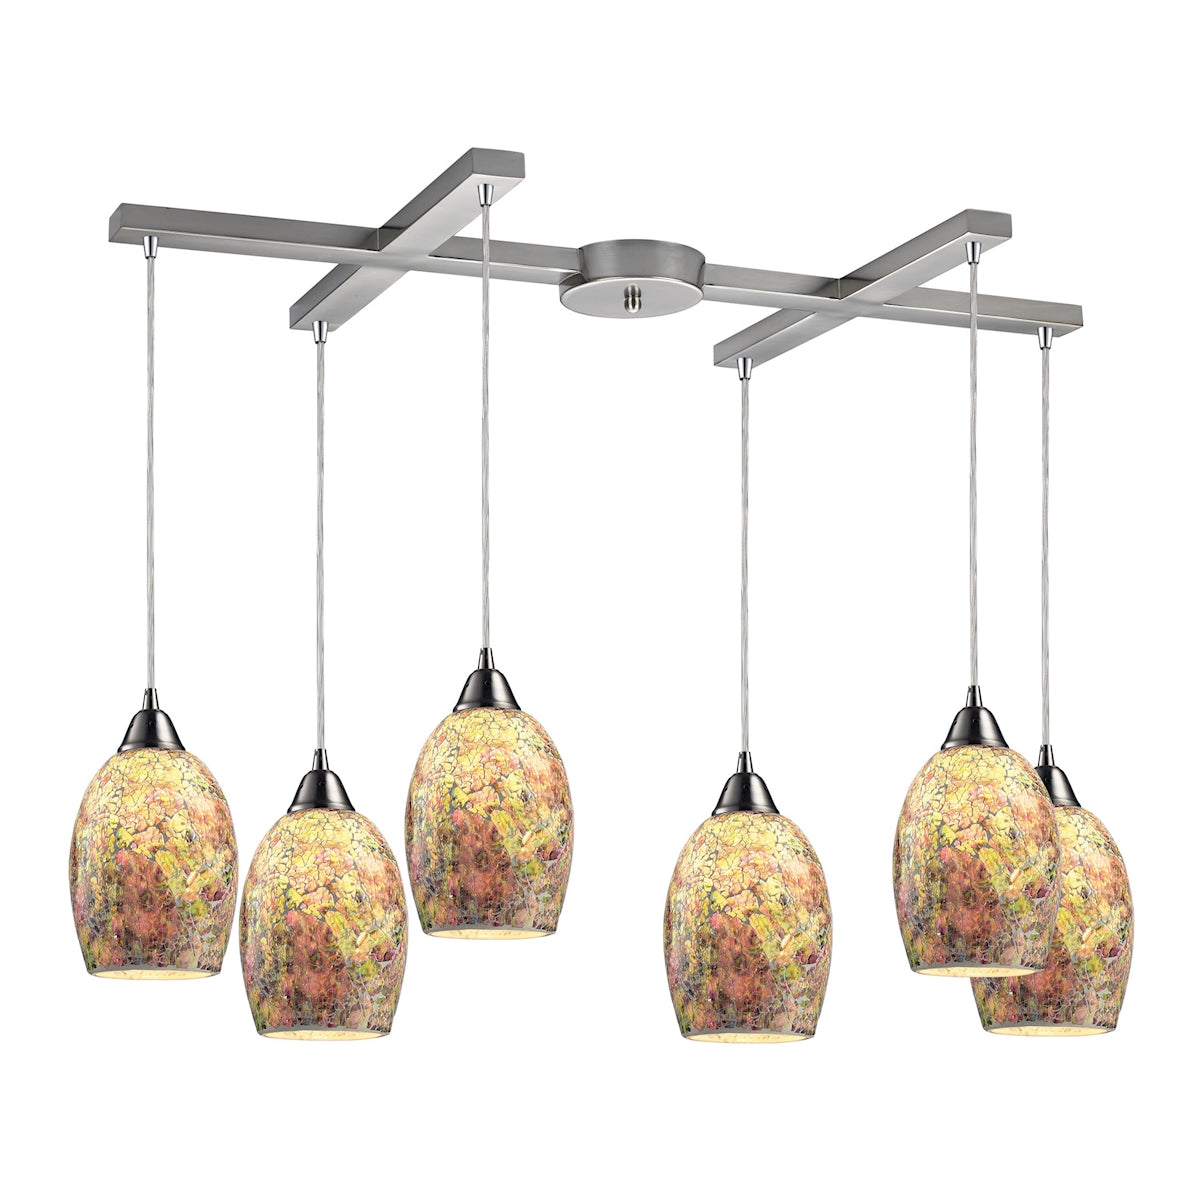 ELK Lighting 73021-6 Avalon 6-Light H-Bar Pendant Fixture in Satin Nickel with Multi-colored Crackle Glass